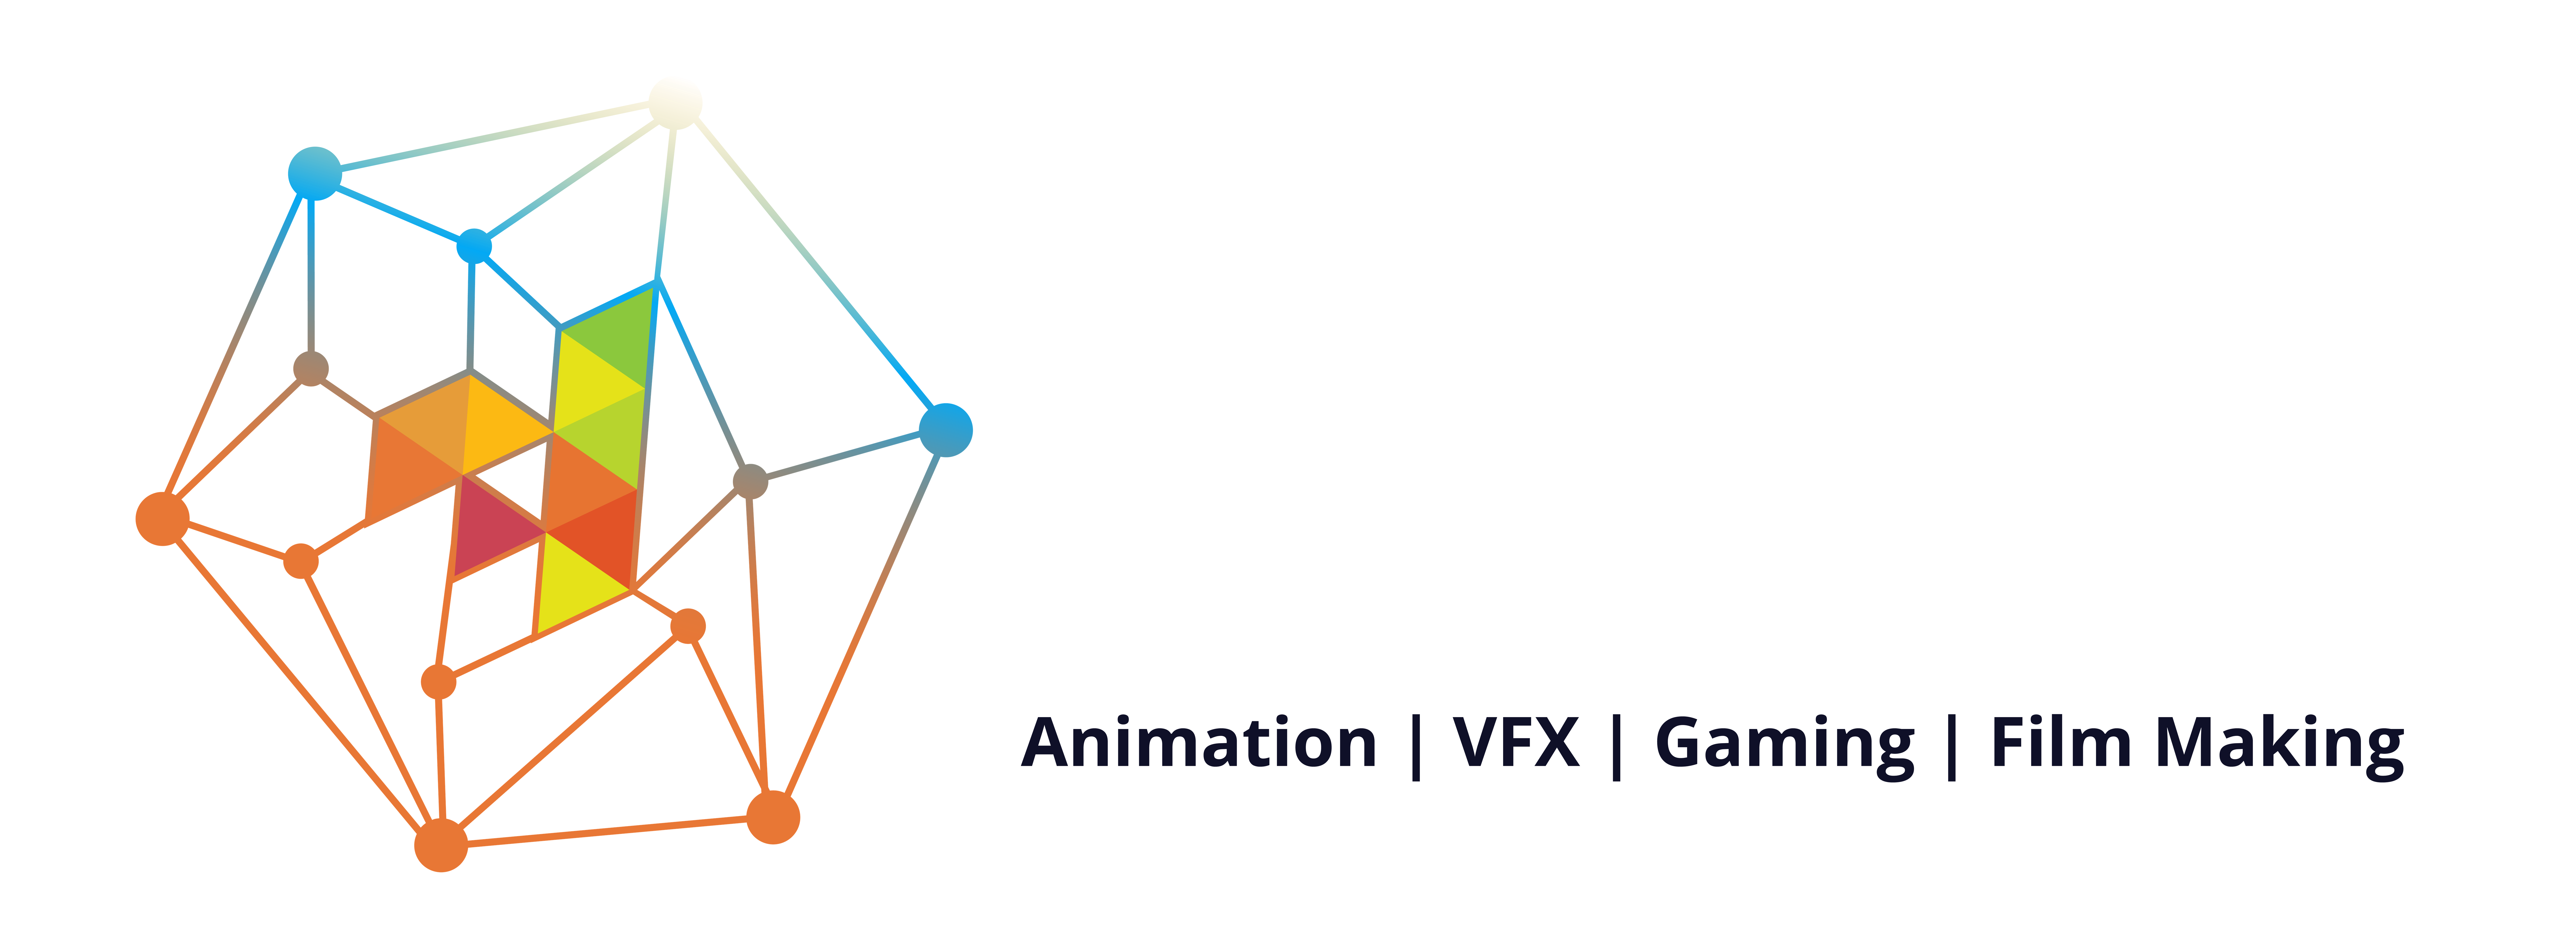  VFX Courses - 2D Animation and 3D Animation Course - Gaming Courses